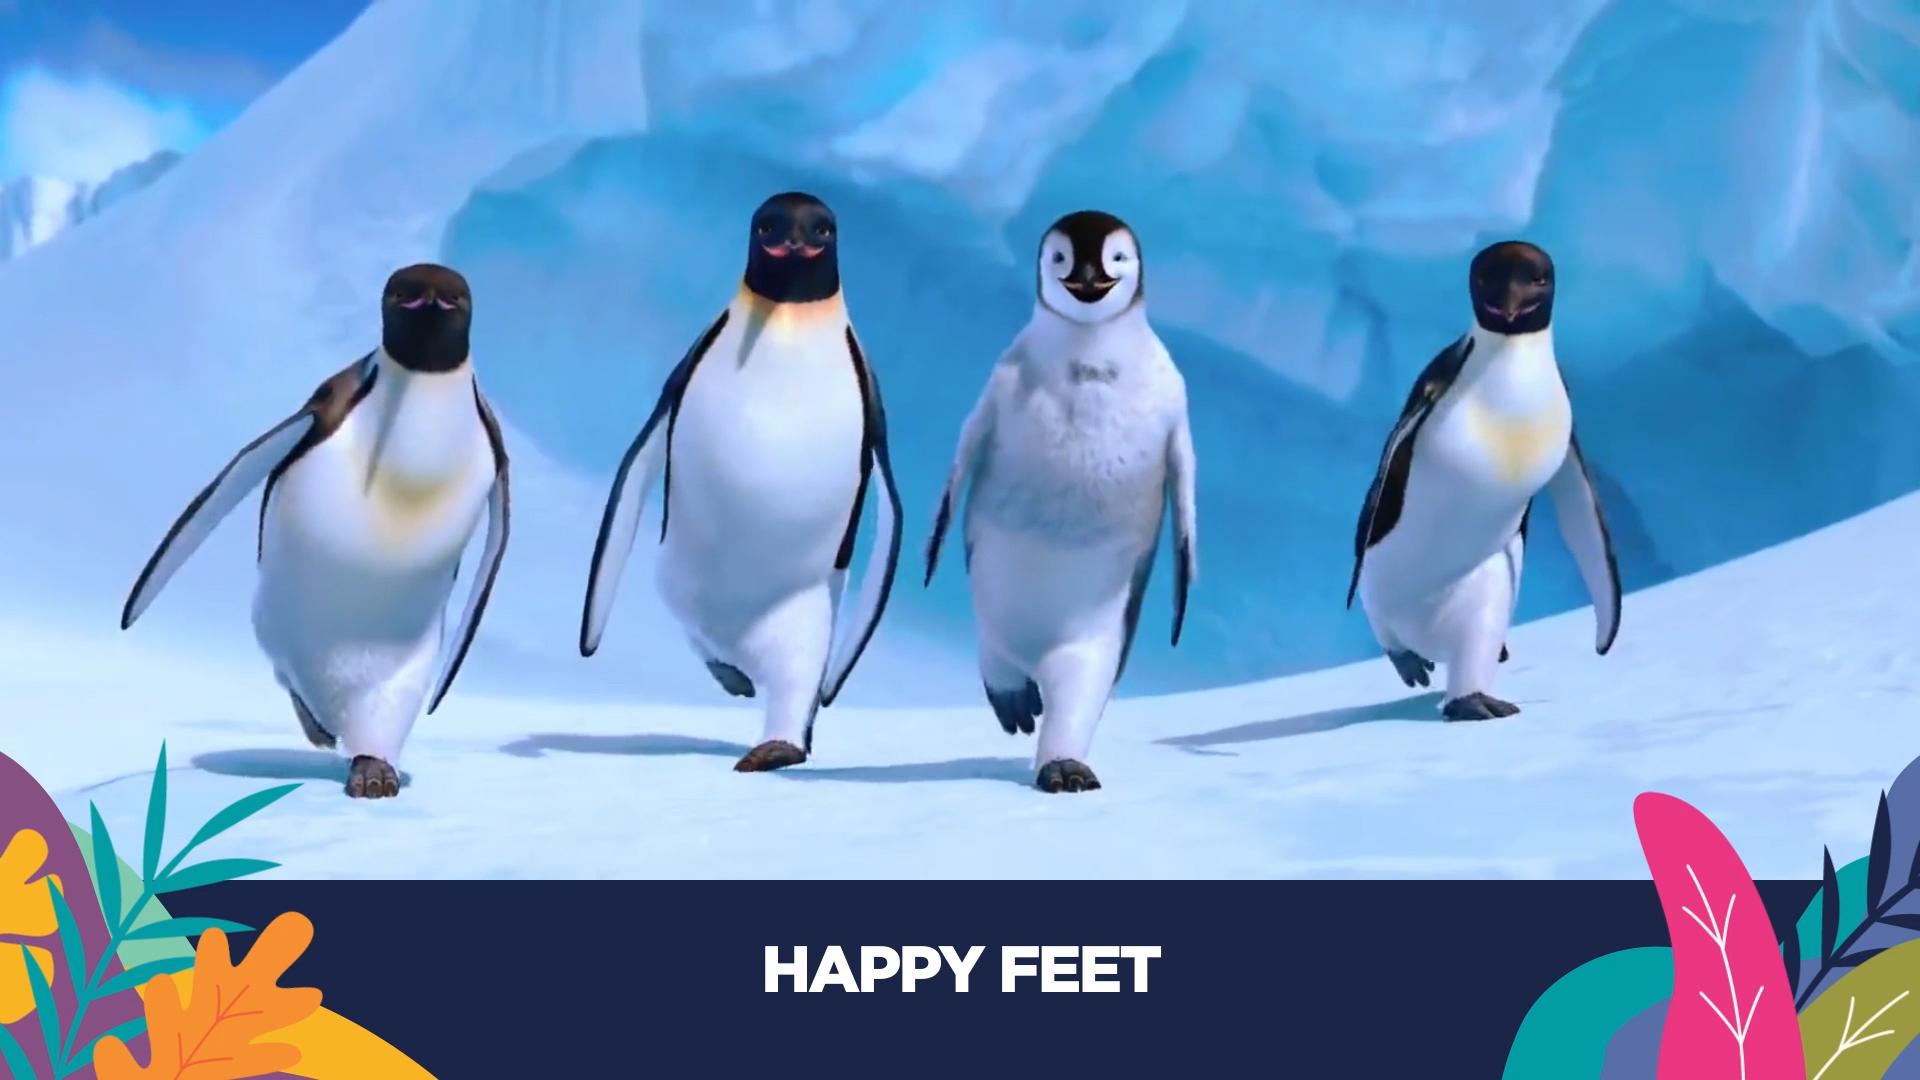 Free movies at Beenleigh Town Square: Happy Feet